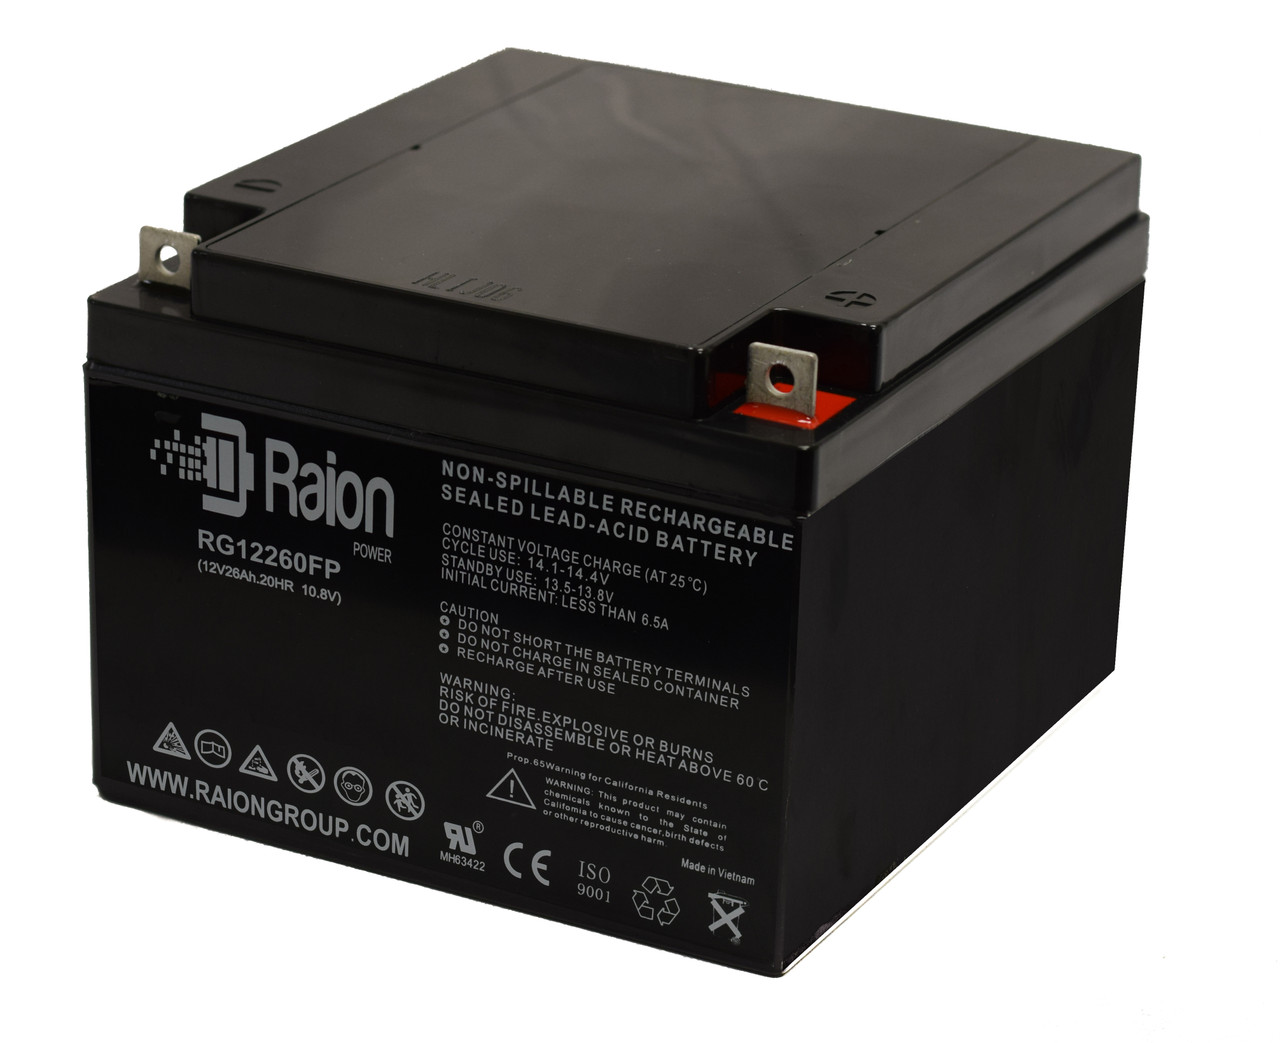 Raion Power Replacement 12V 26Ah Battery for R&D 5424 - 1 Pack